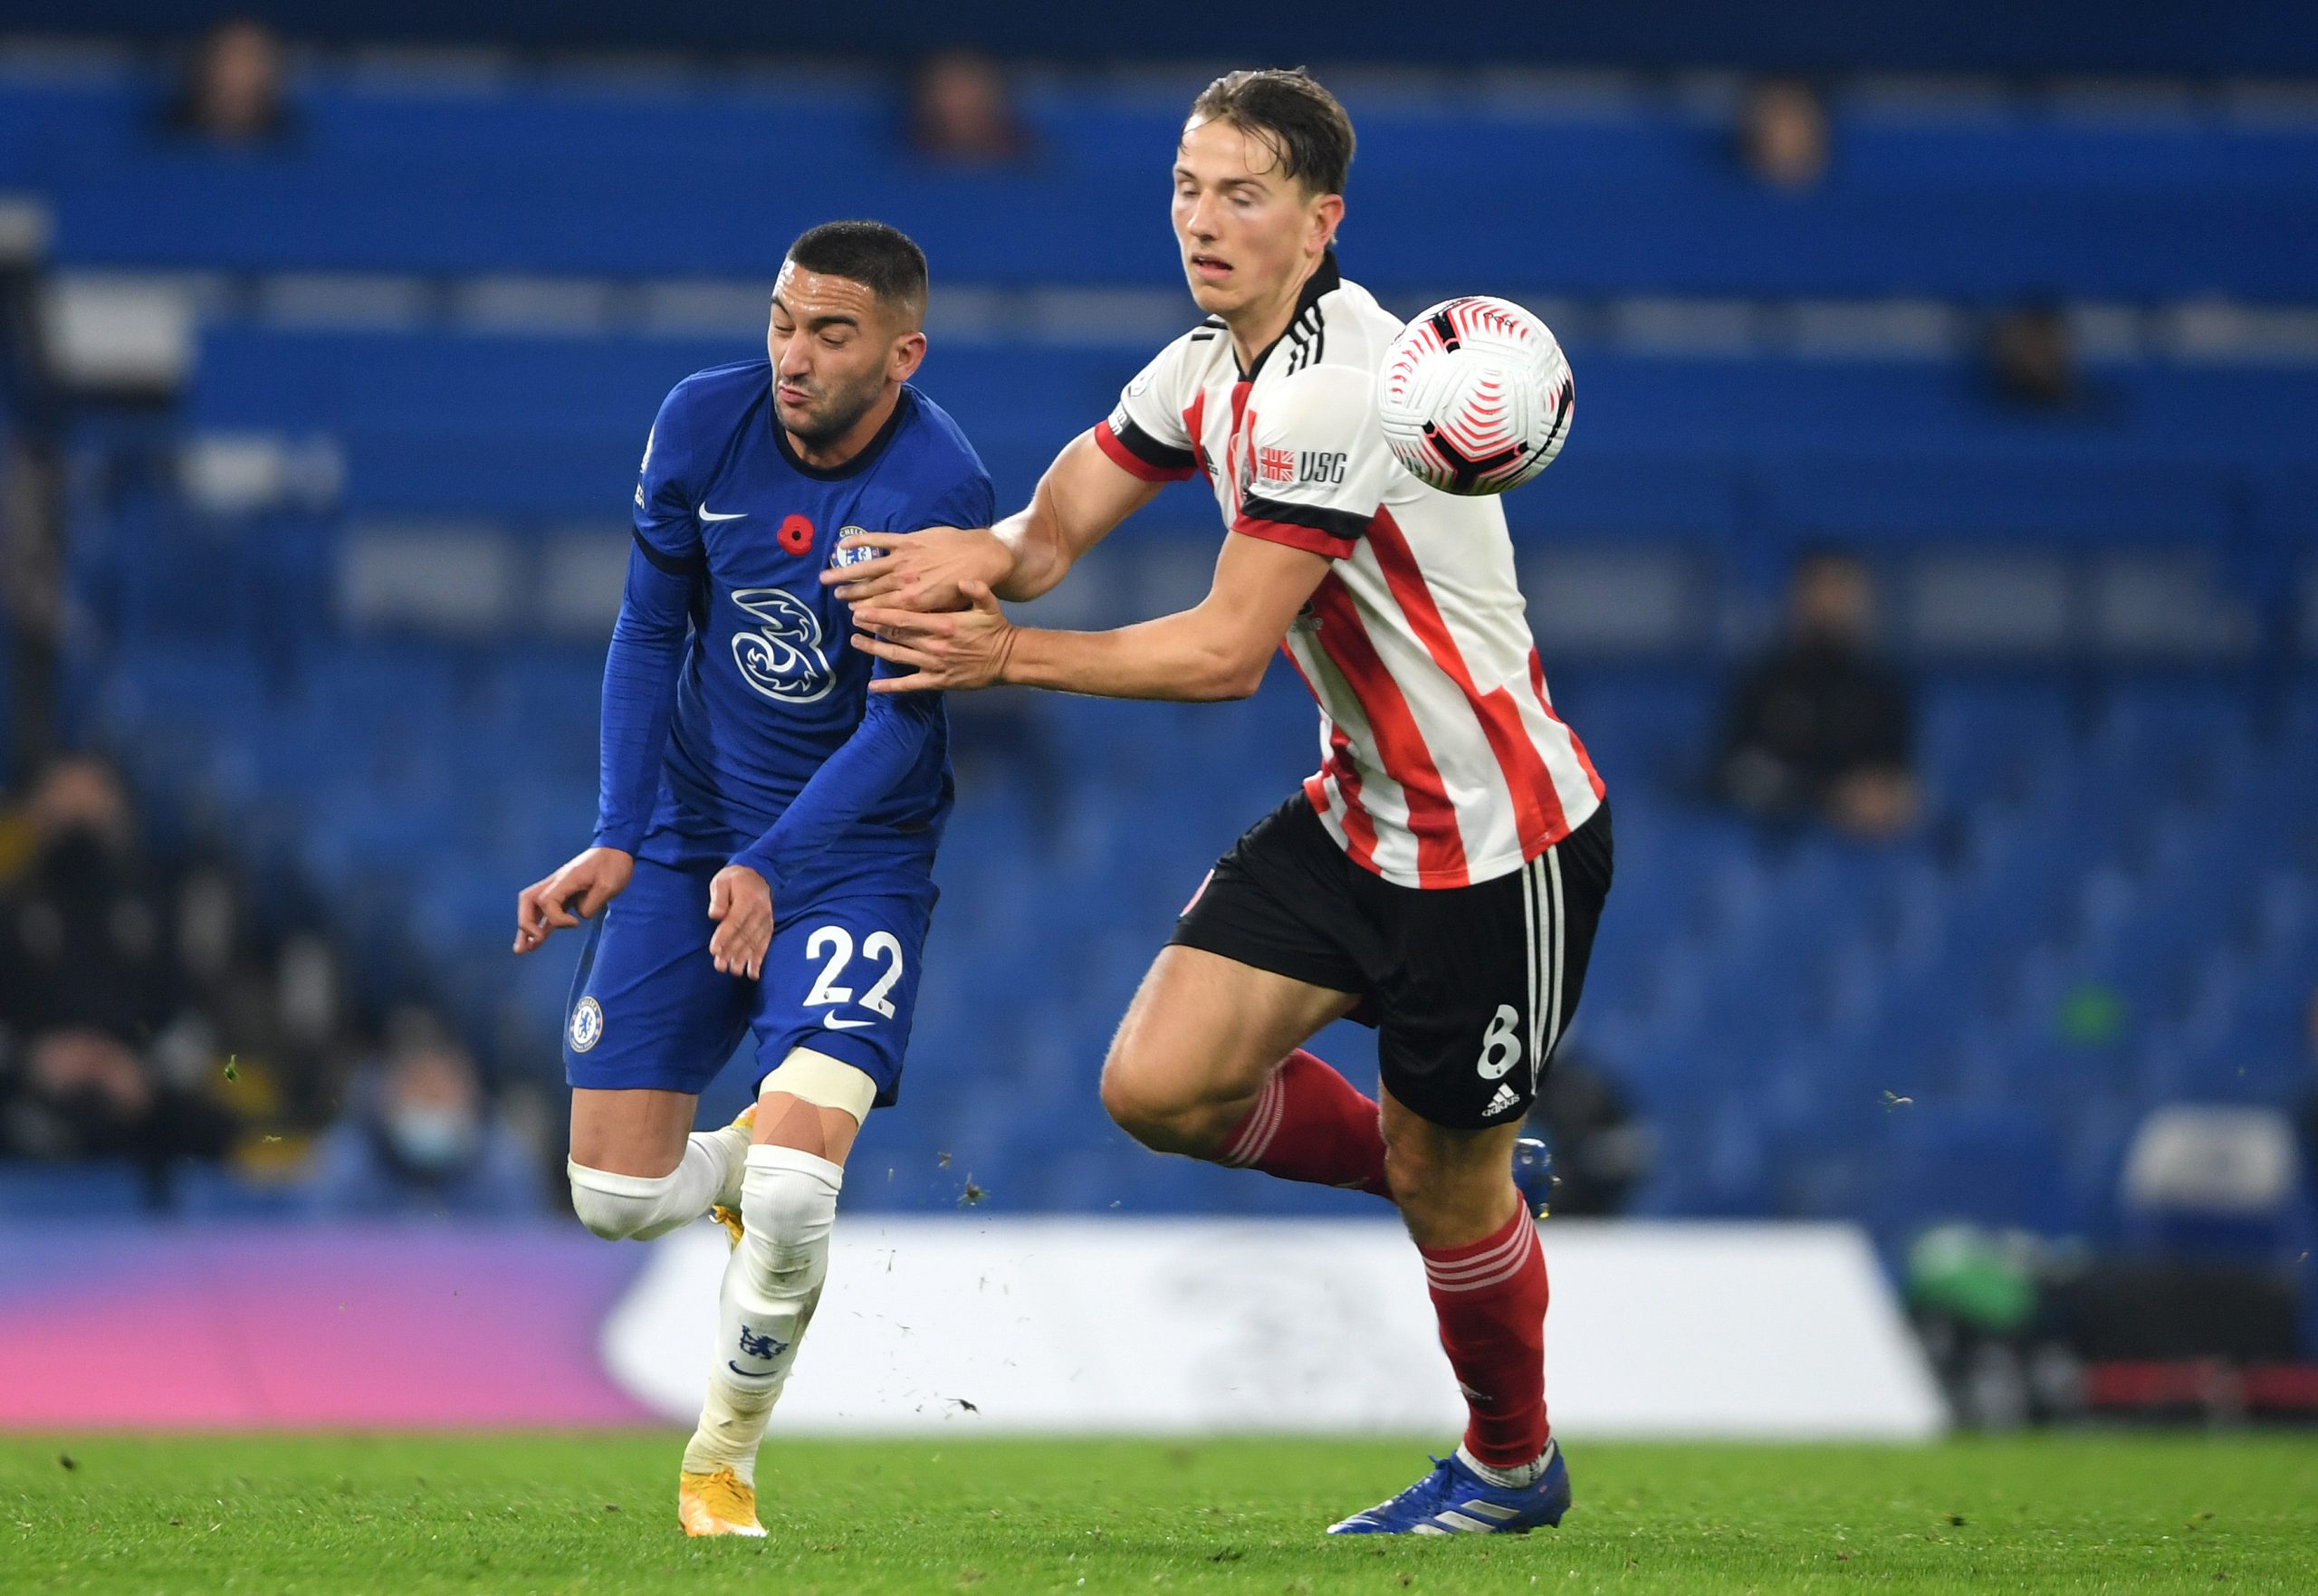 Hakim Ziyech of Chelsea battle for possession with Sander Berge of Sheffield United.